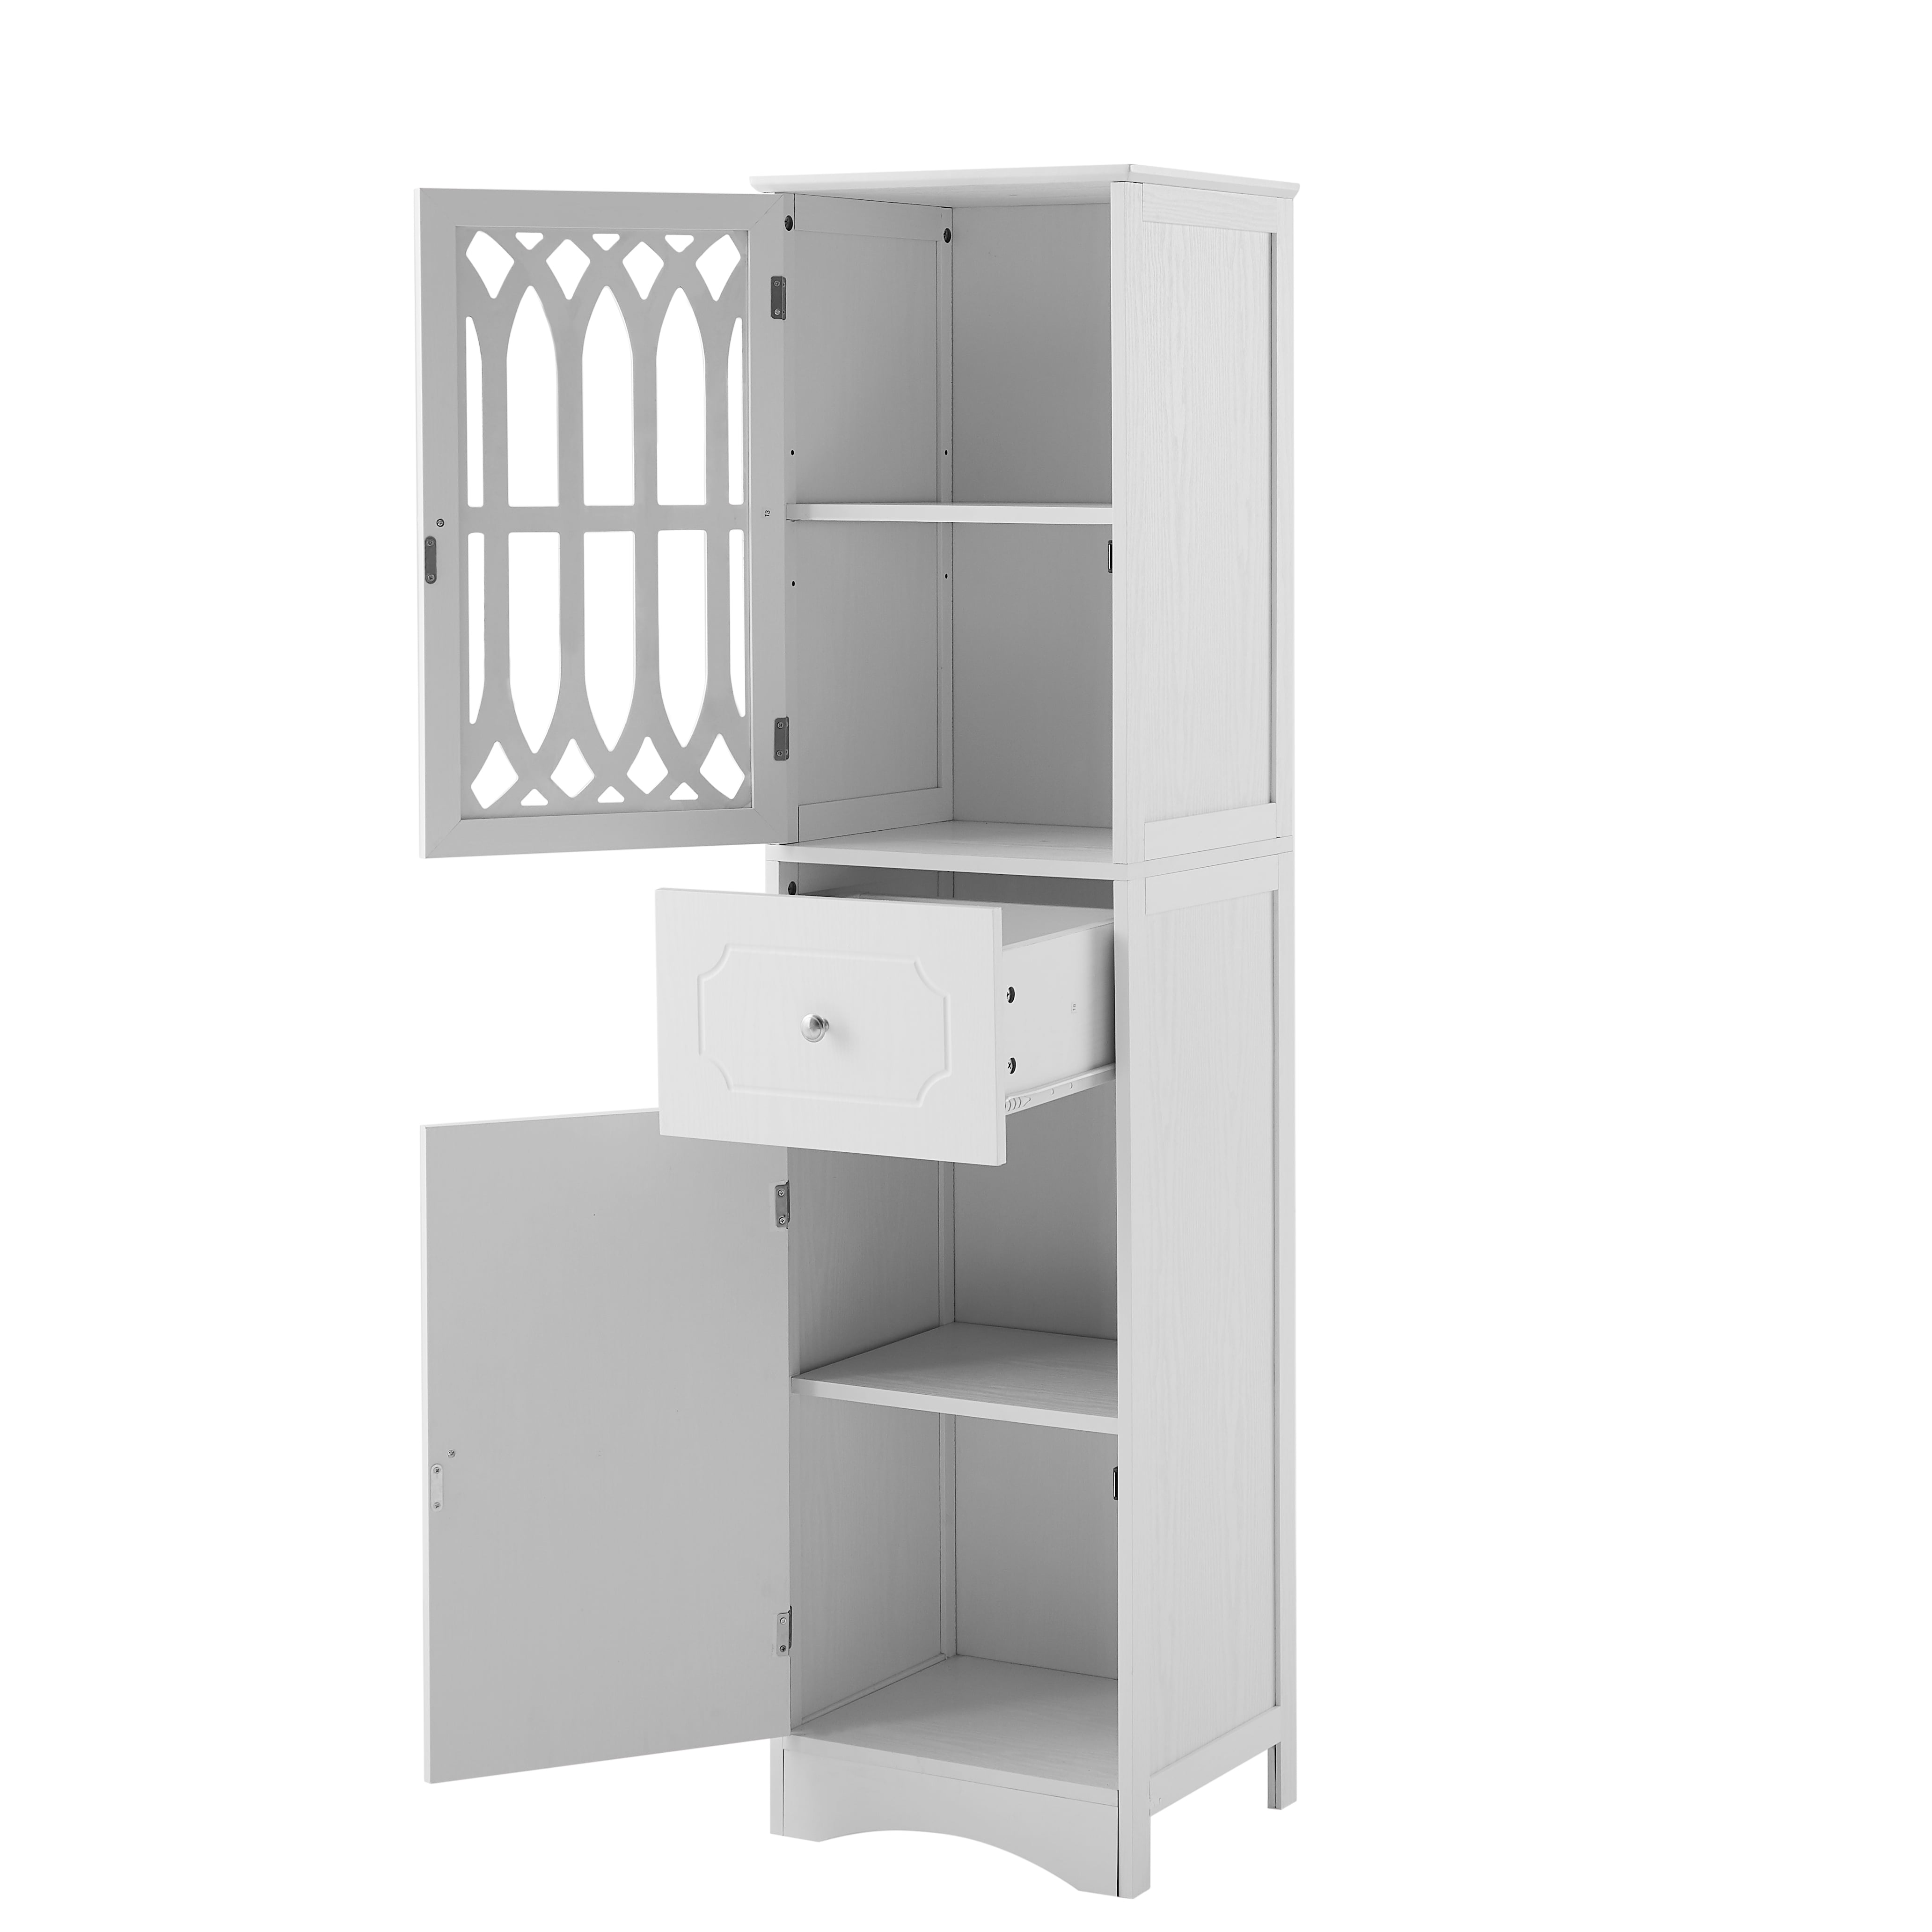 HAUSHECK Tall Slim Bathroom Storage, Narrow Freestanding Floor Cabinets  Tower w/ 3-Tier Adjustable Shelf and 1 Drawer for Home, Kitchen, Living  Room